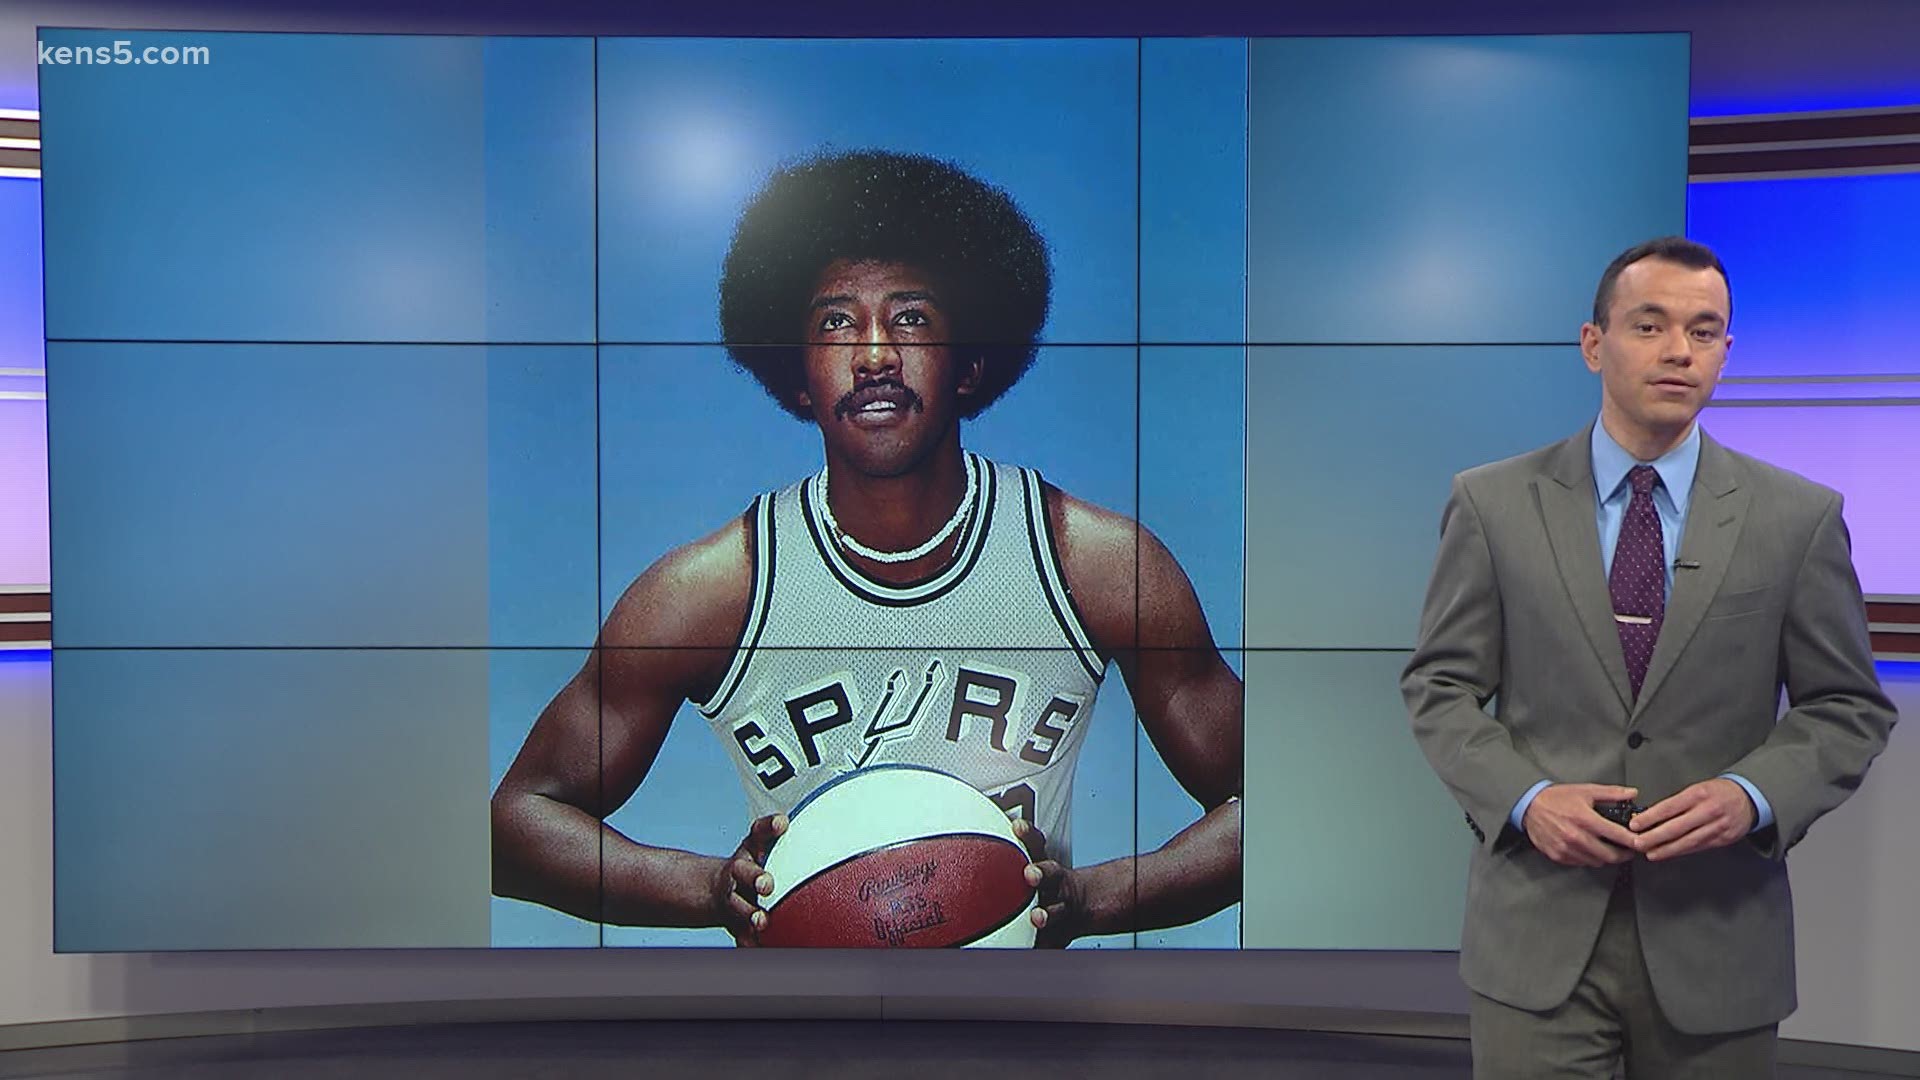 Gale spent six seasons with the Spurs as part of a 12-year NBA career. He was 70 years old.